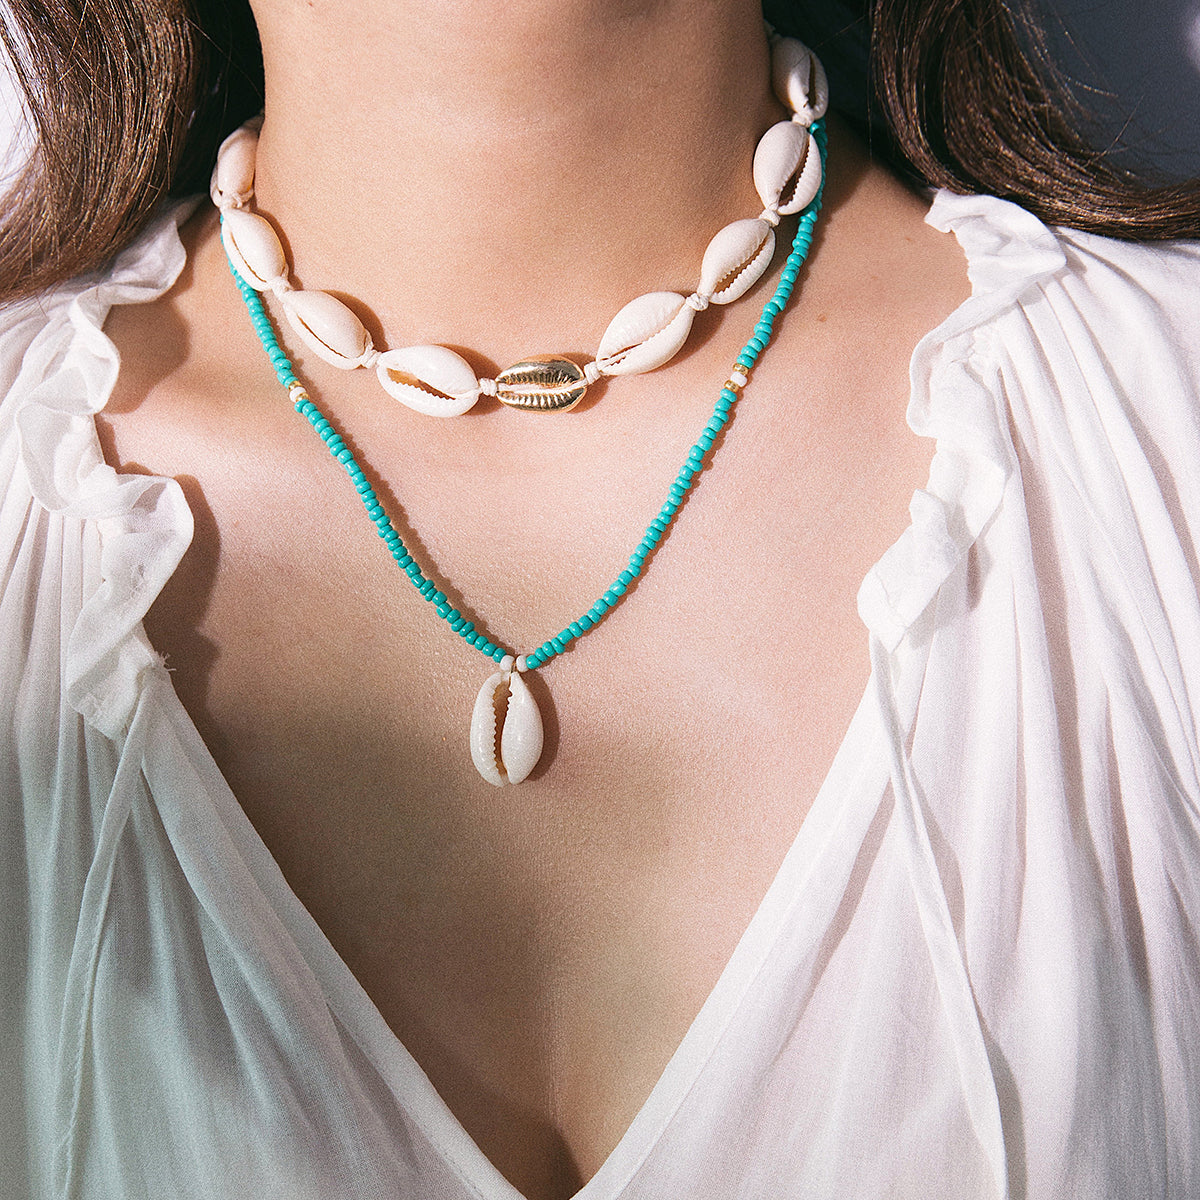 Teal Howlite & Shell Silver-Plated Beaded Pendant Necklace Set